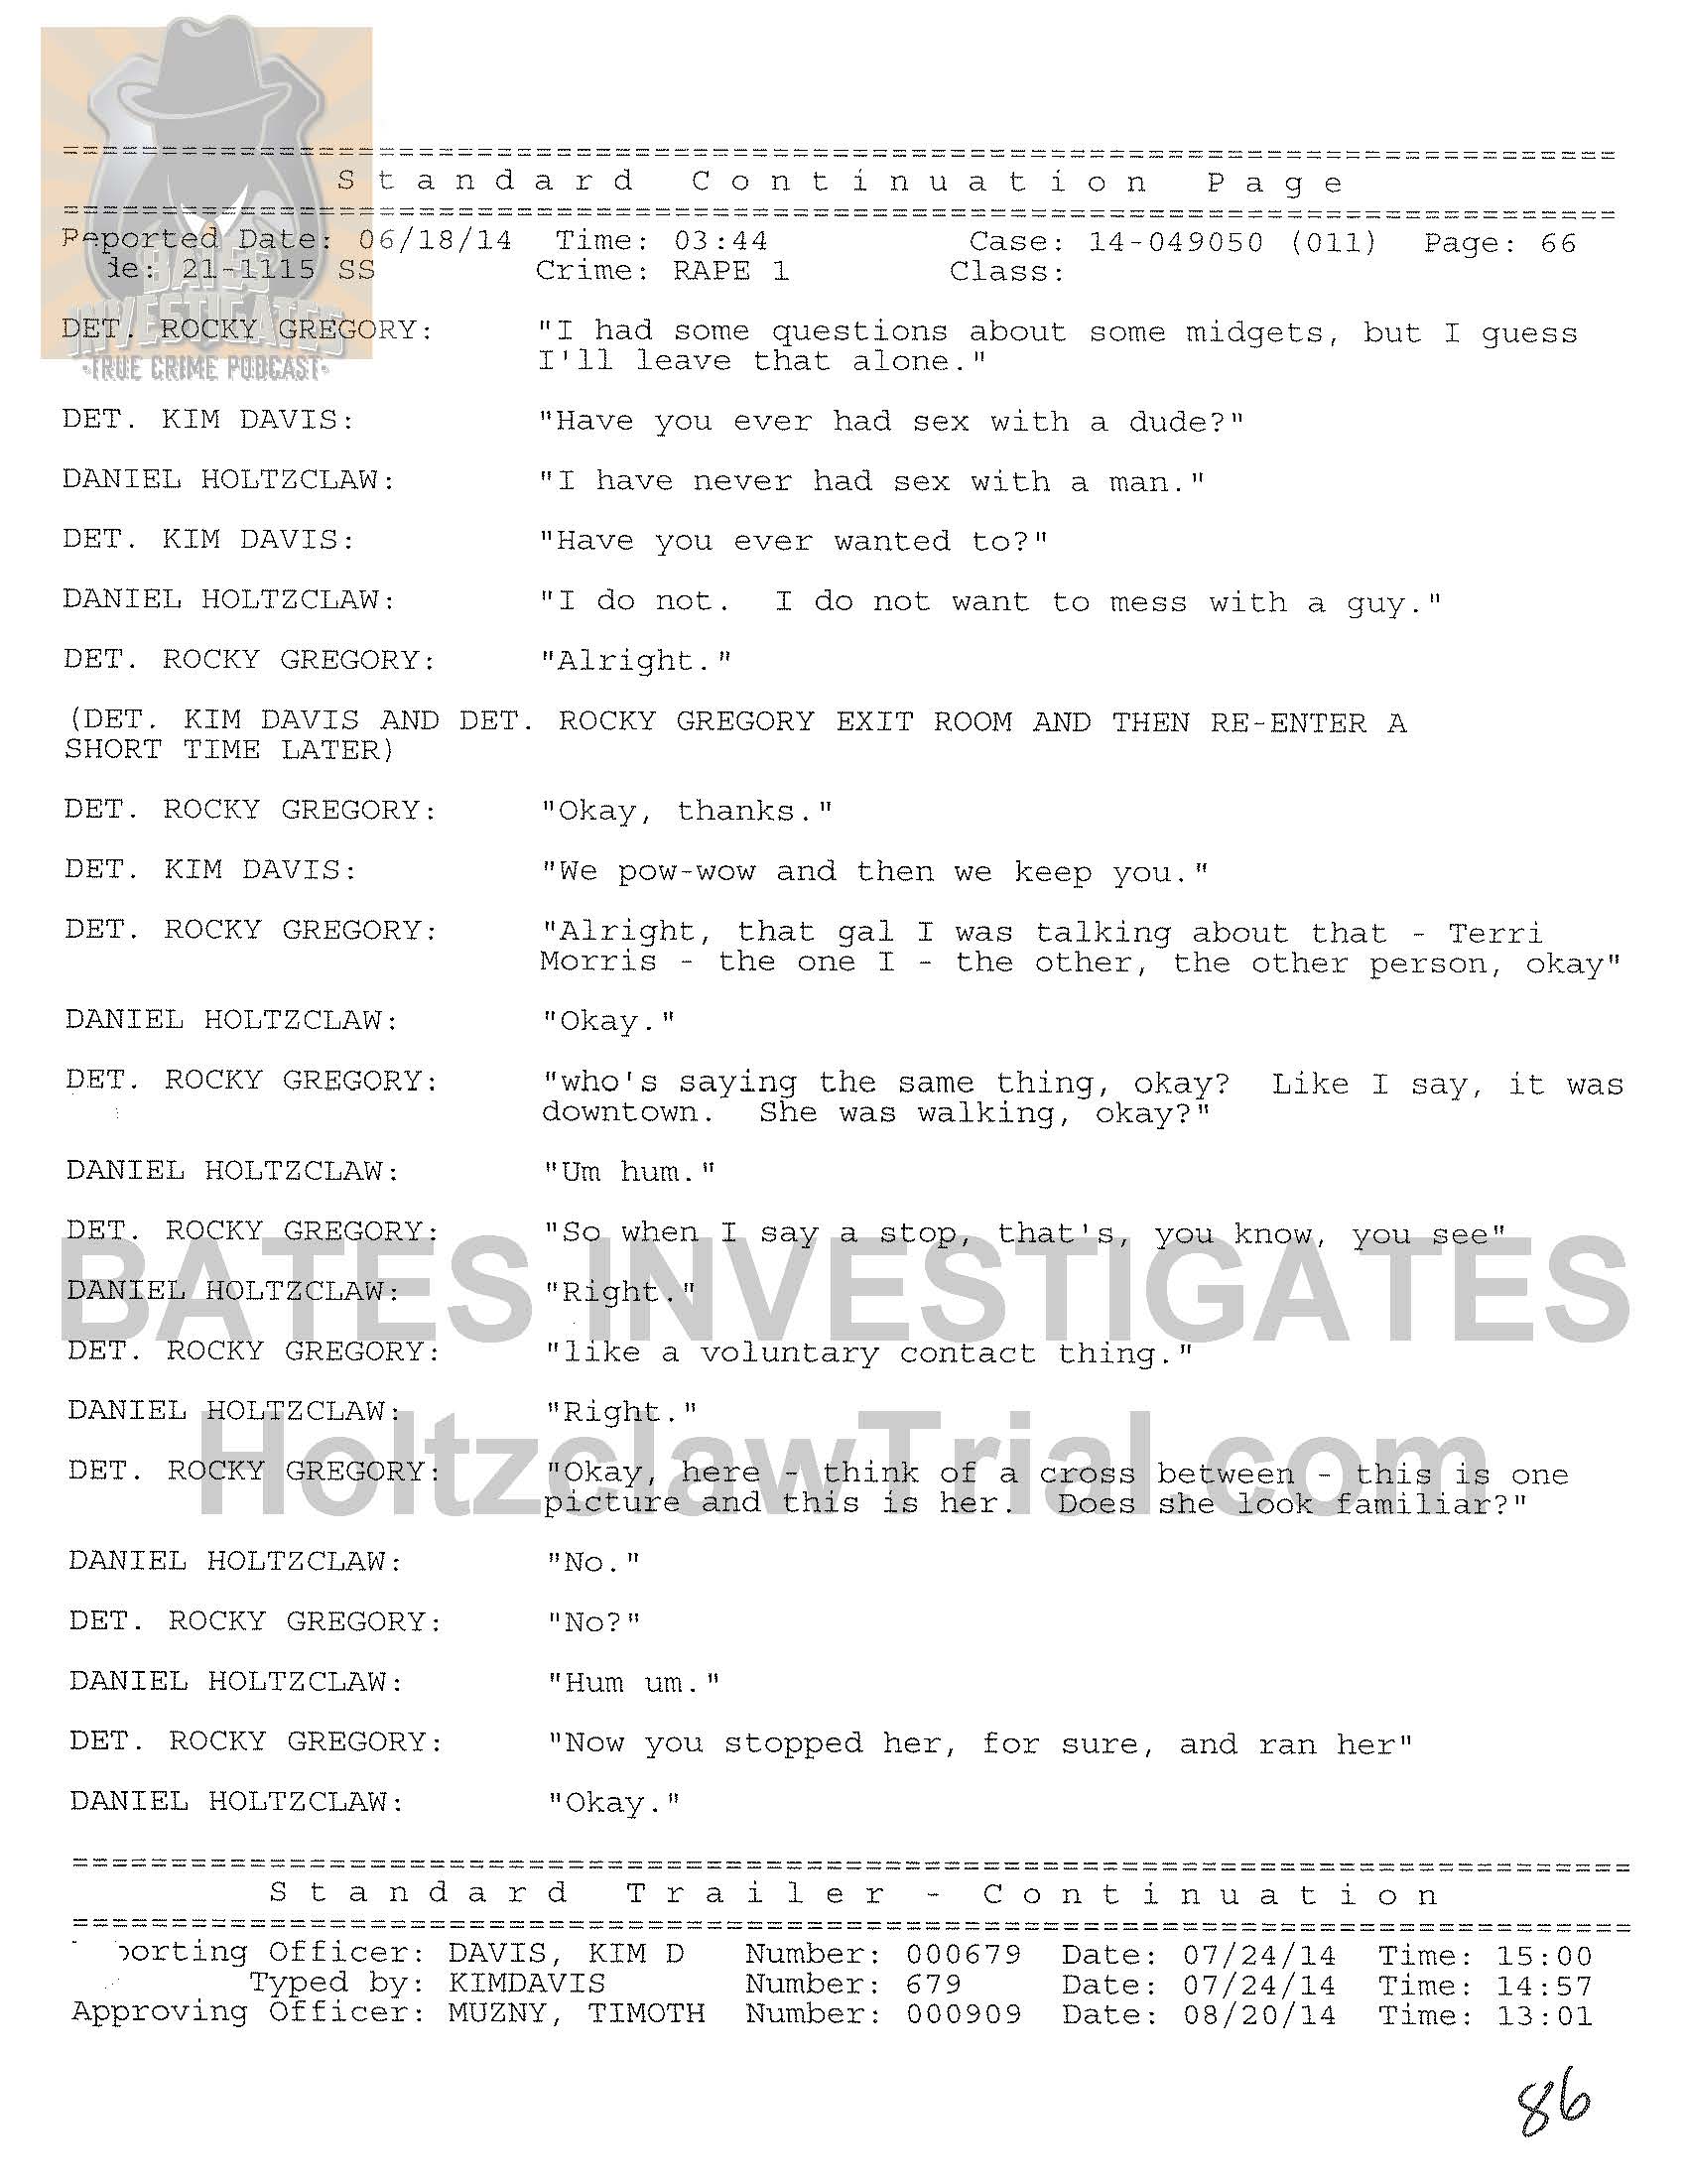 Holtzclaw Interrogation Transcript - Ep02 Redacted_Page_66.jpg